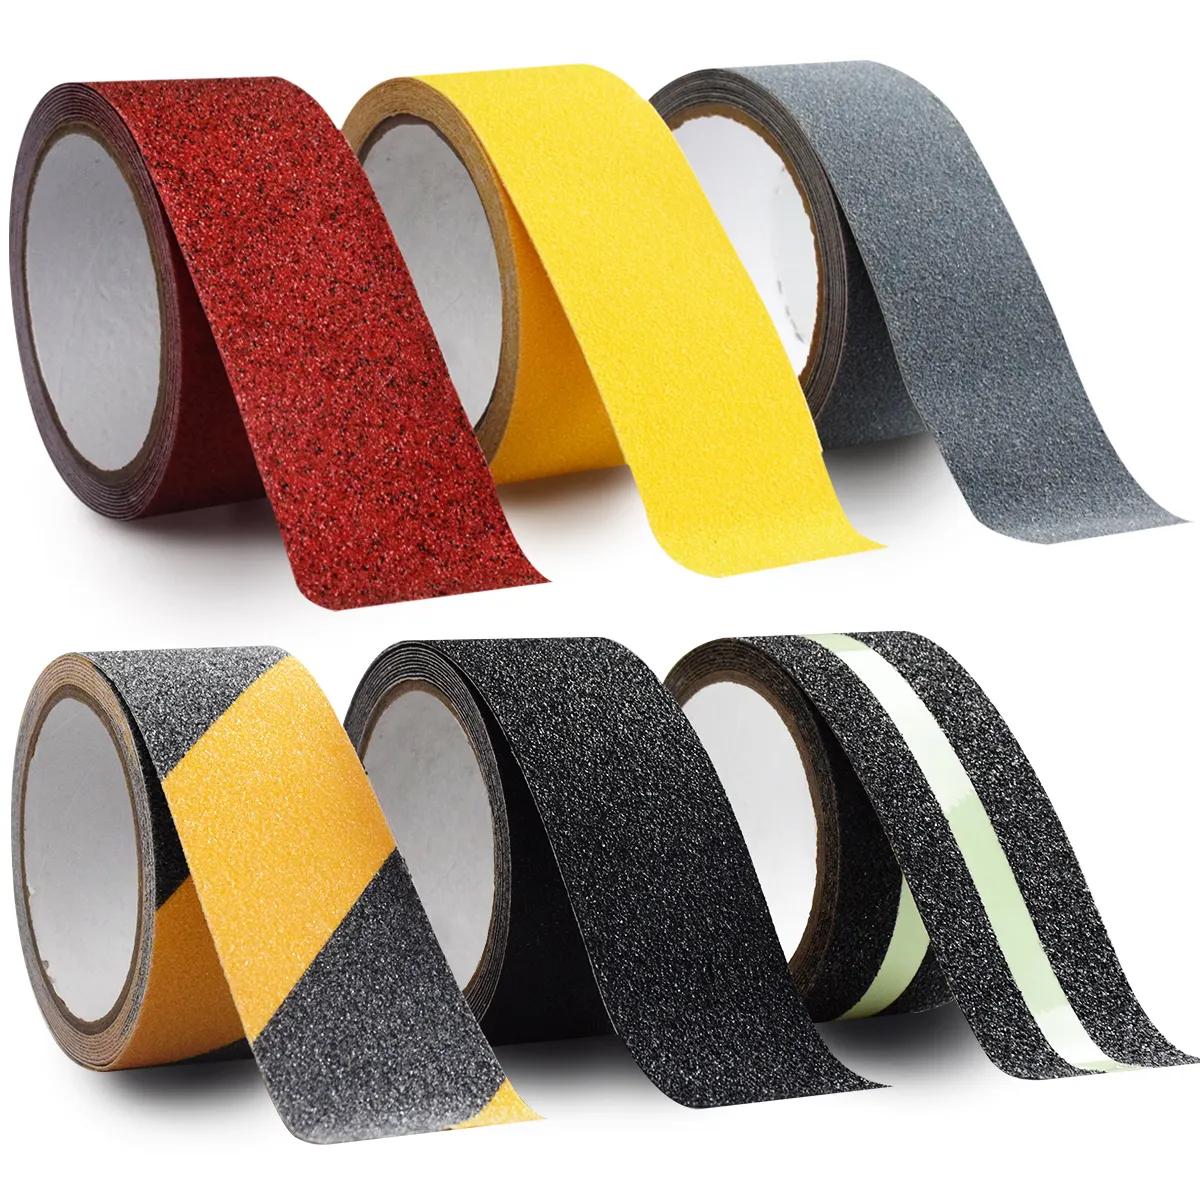 EONBON Customize Easy to Apply Quality Adhesion Floor Safety Tape And Anti Slip Tape 5m